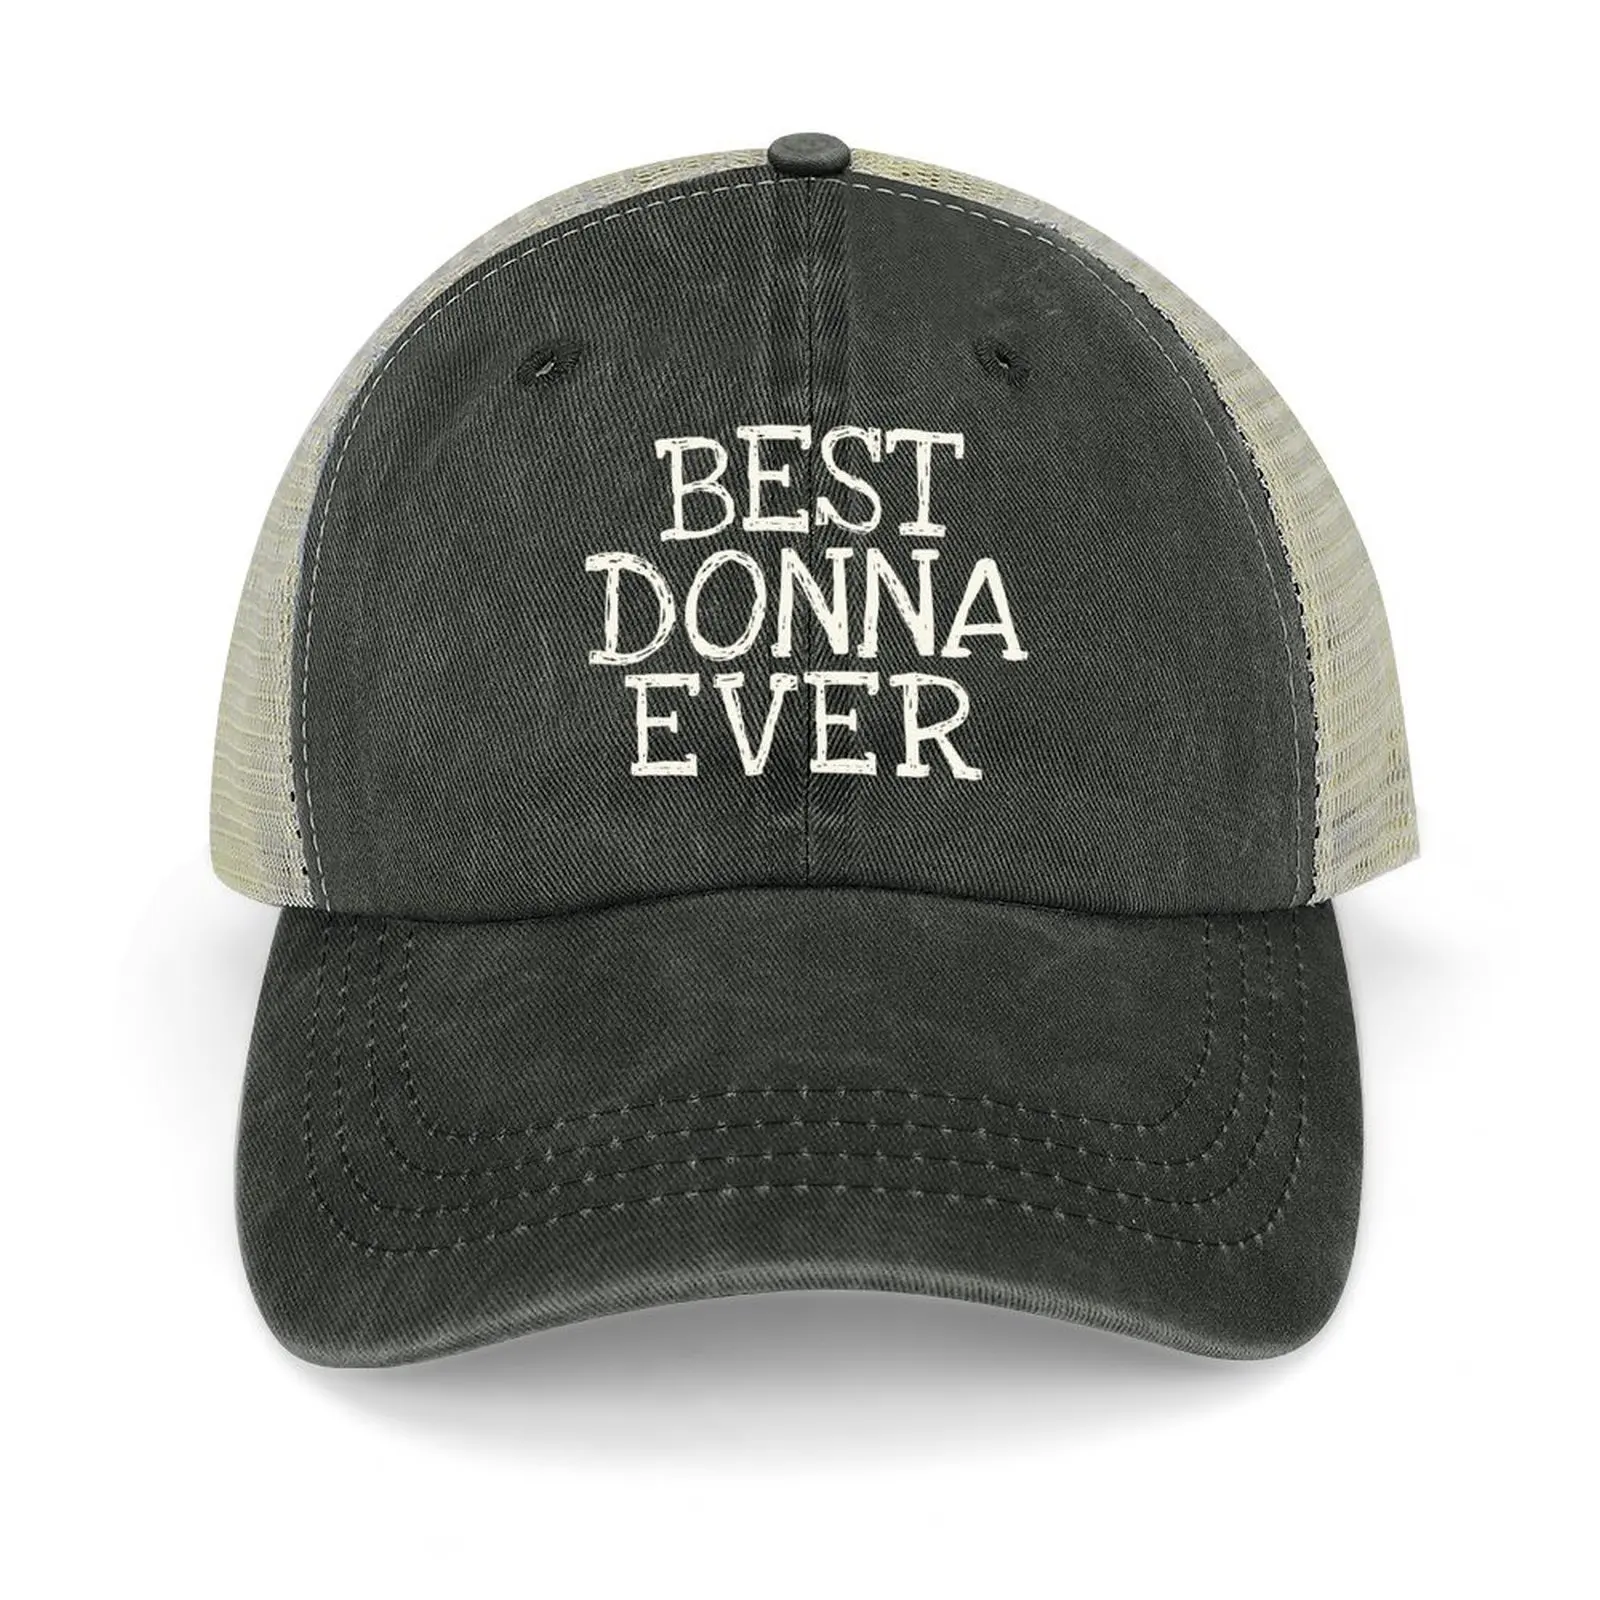 

Best Donna Ever Funny Personalized Name Cowboy Hat funny hat New Hat hiking Men's Hats Women's